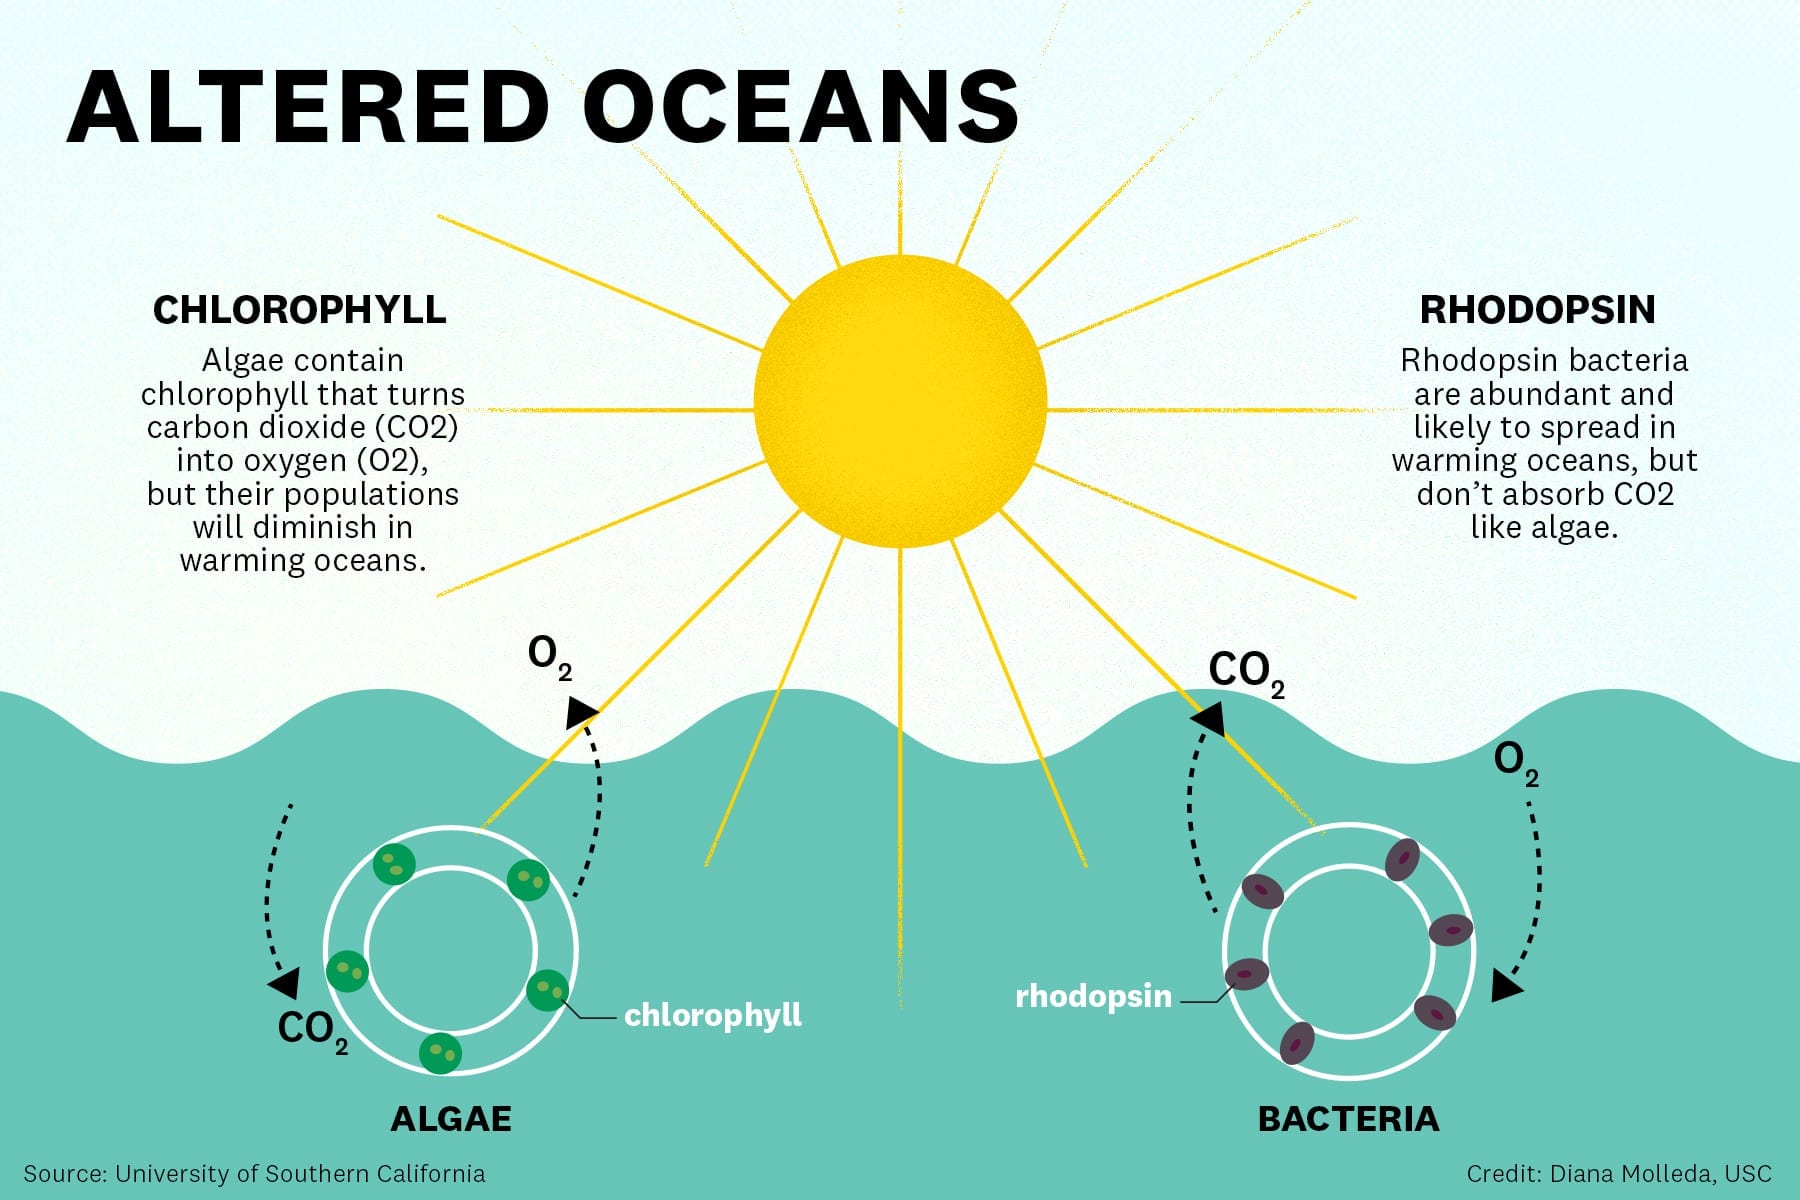 Is this how certain marine microbes could contribute to climate change?